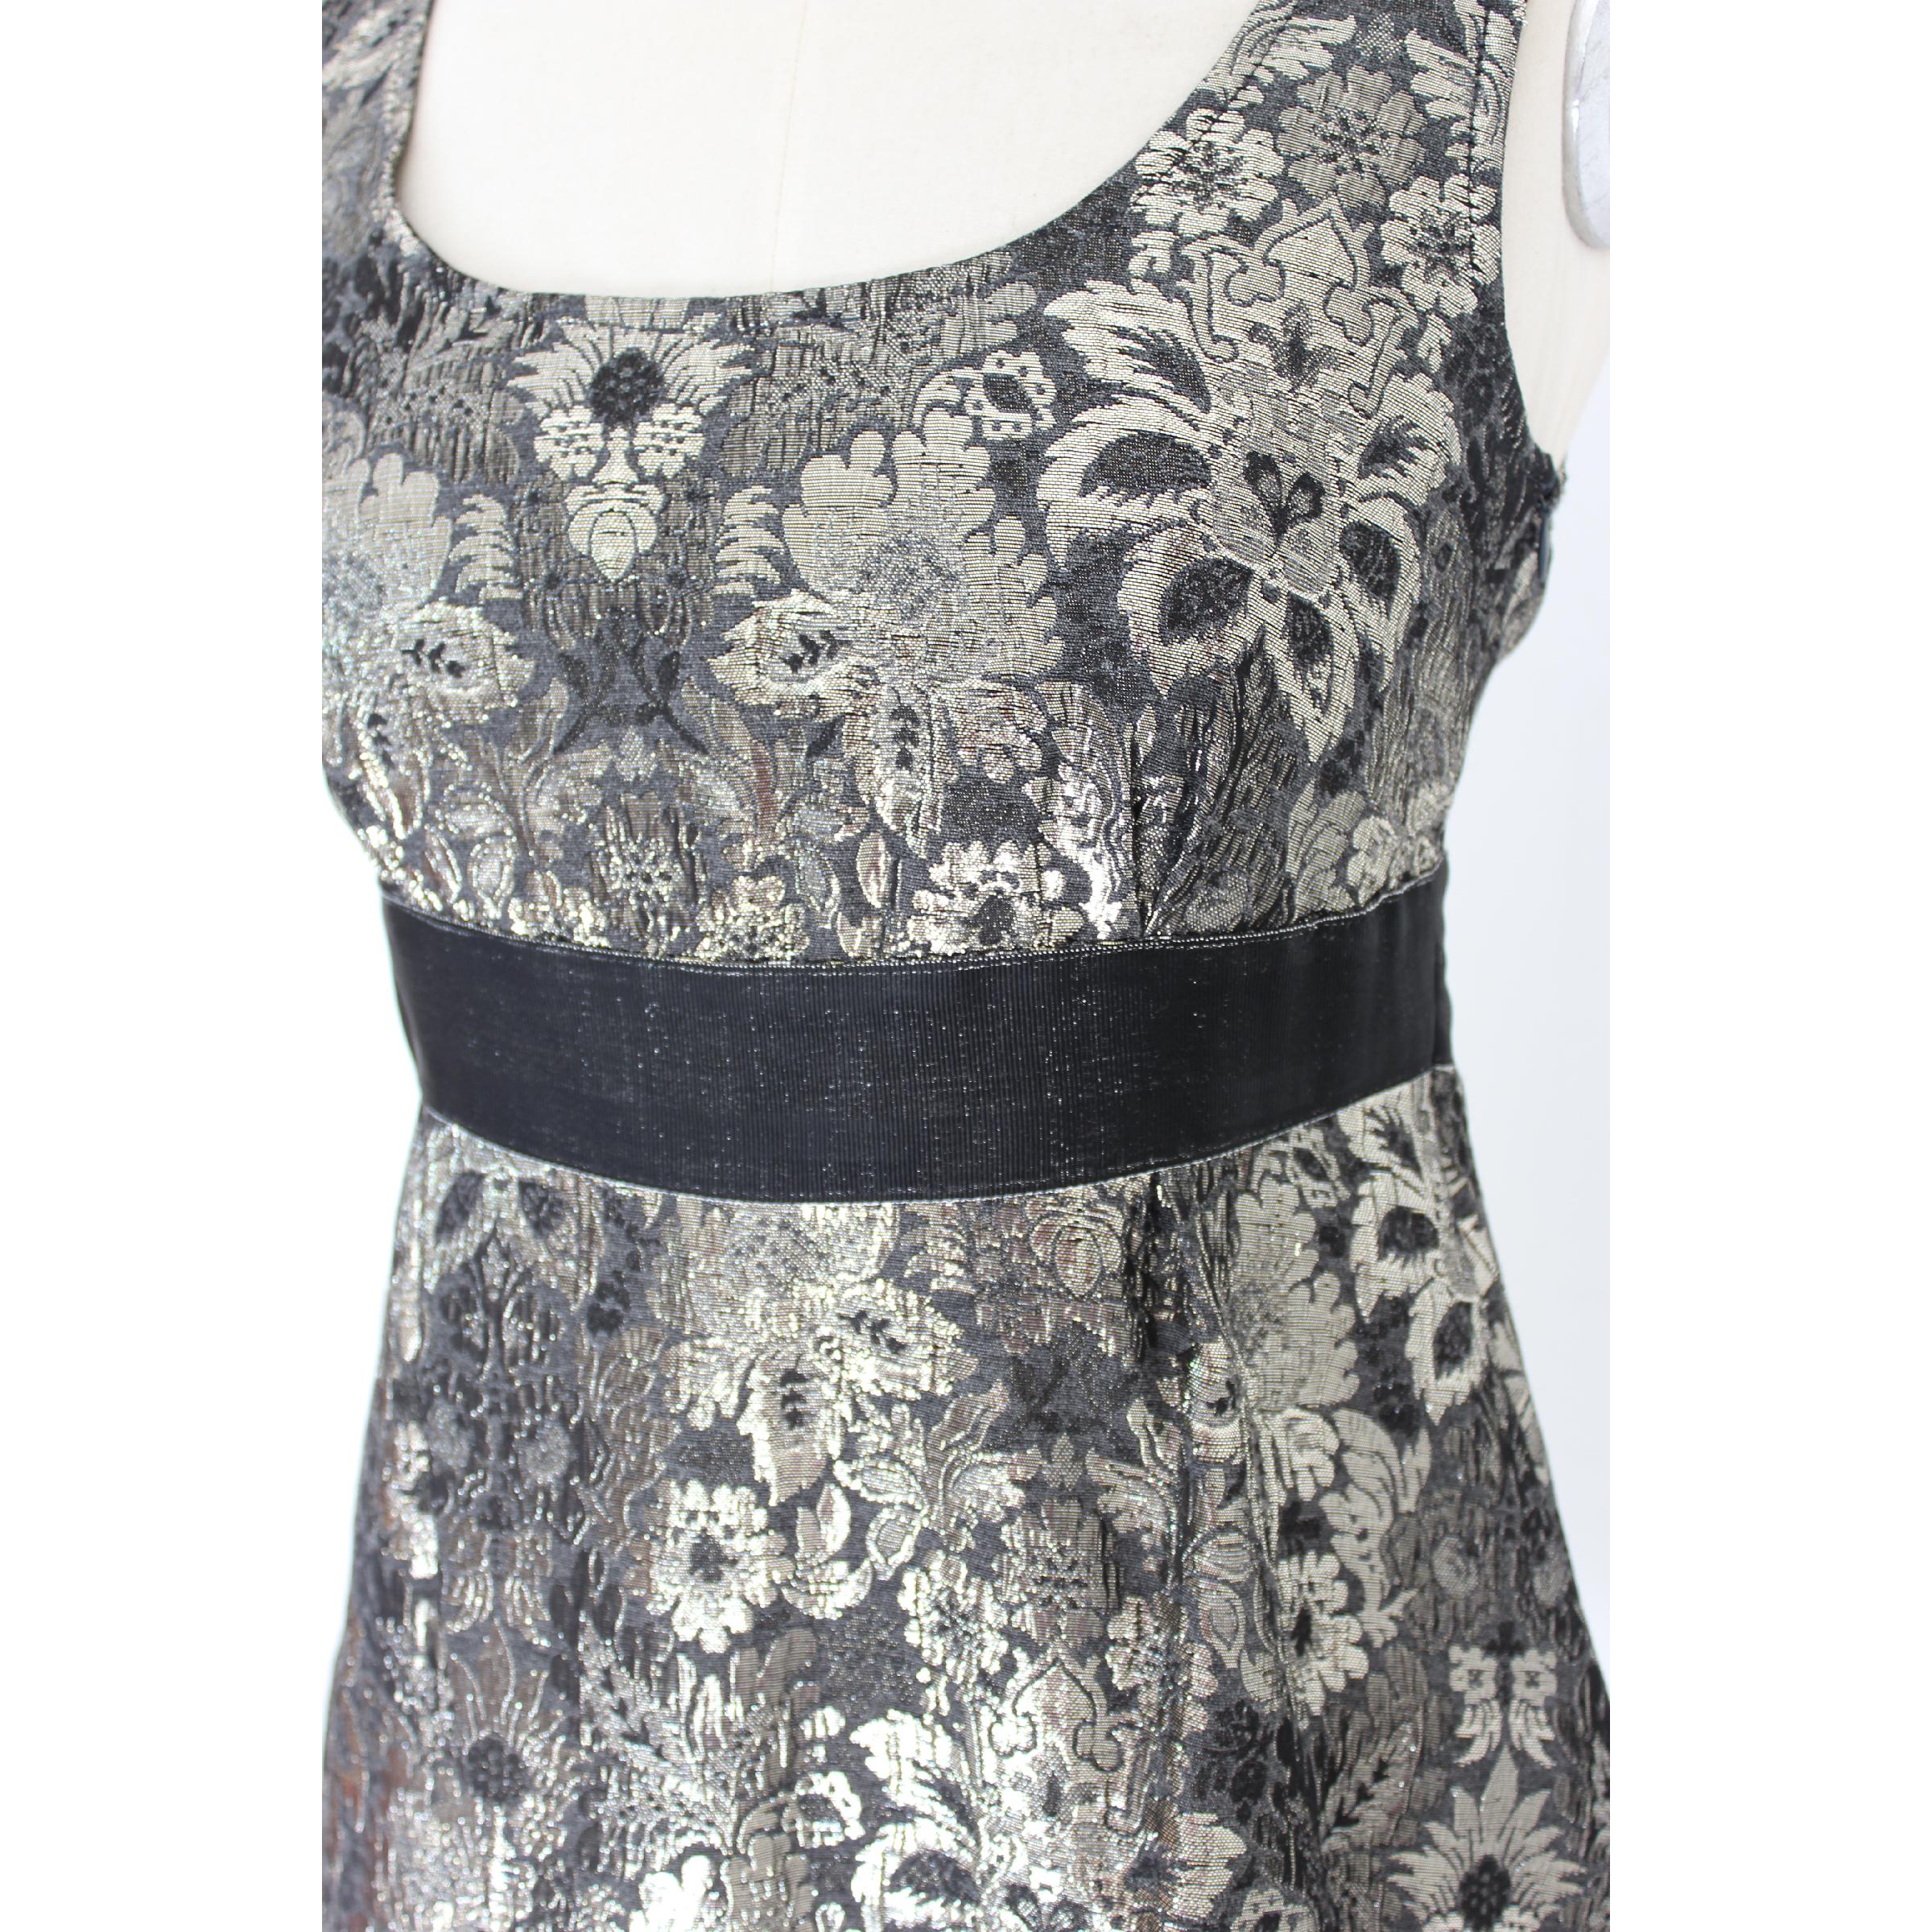 Moschino Black Lame Floral Evening Sheath Dress 1990s For Sale 2